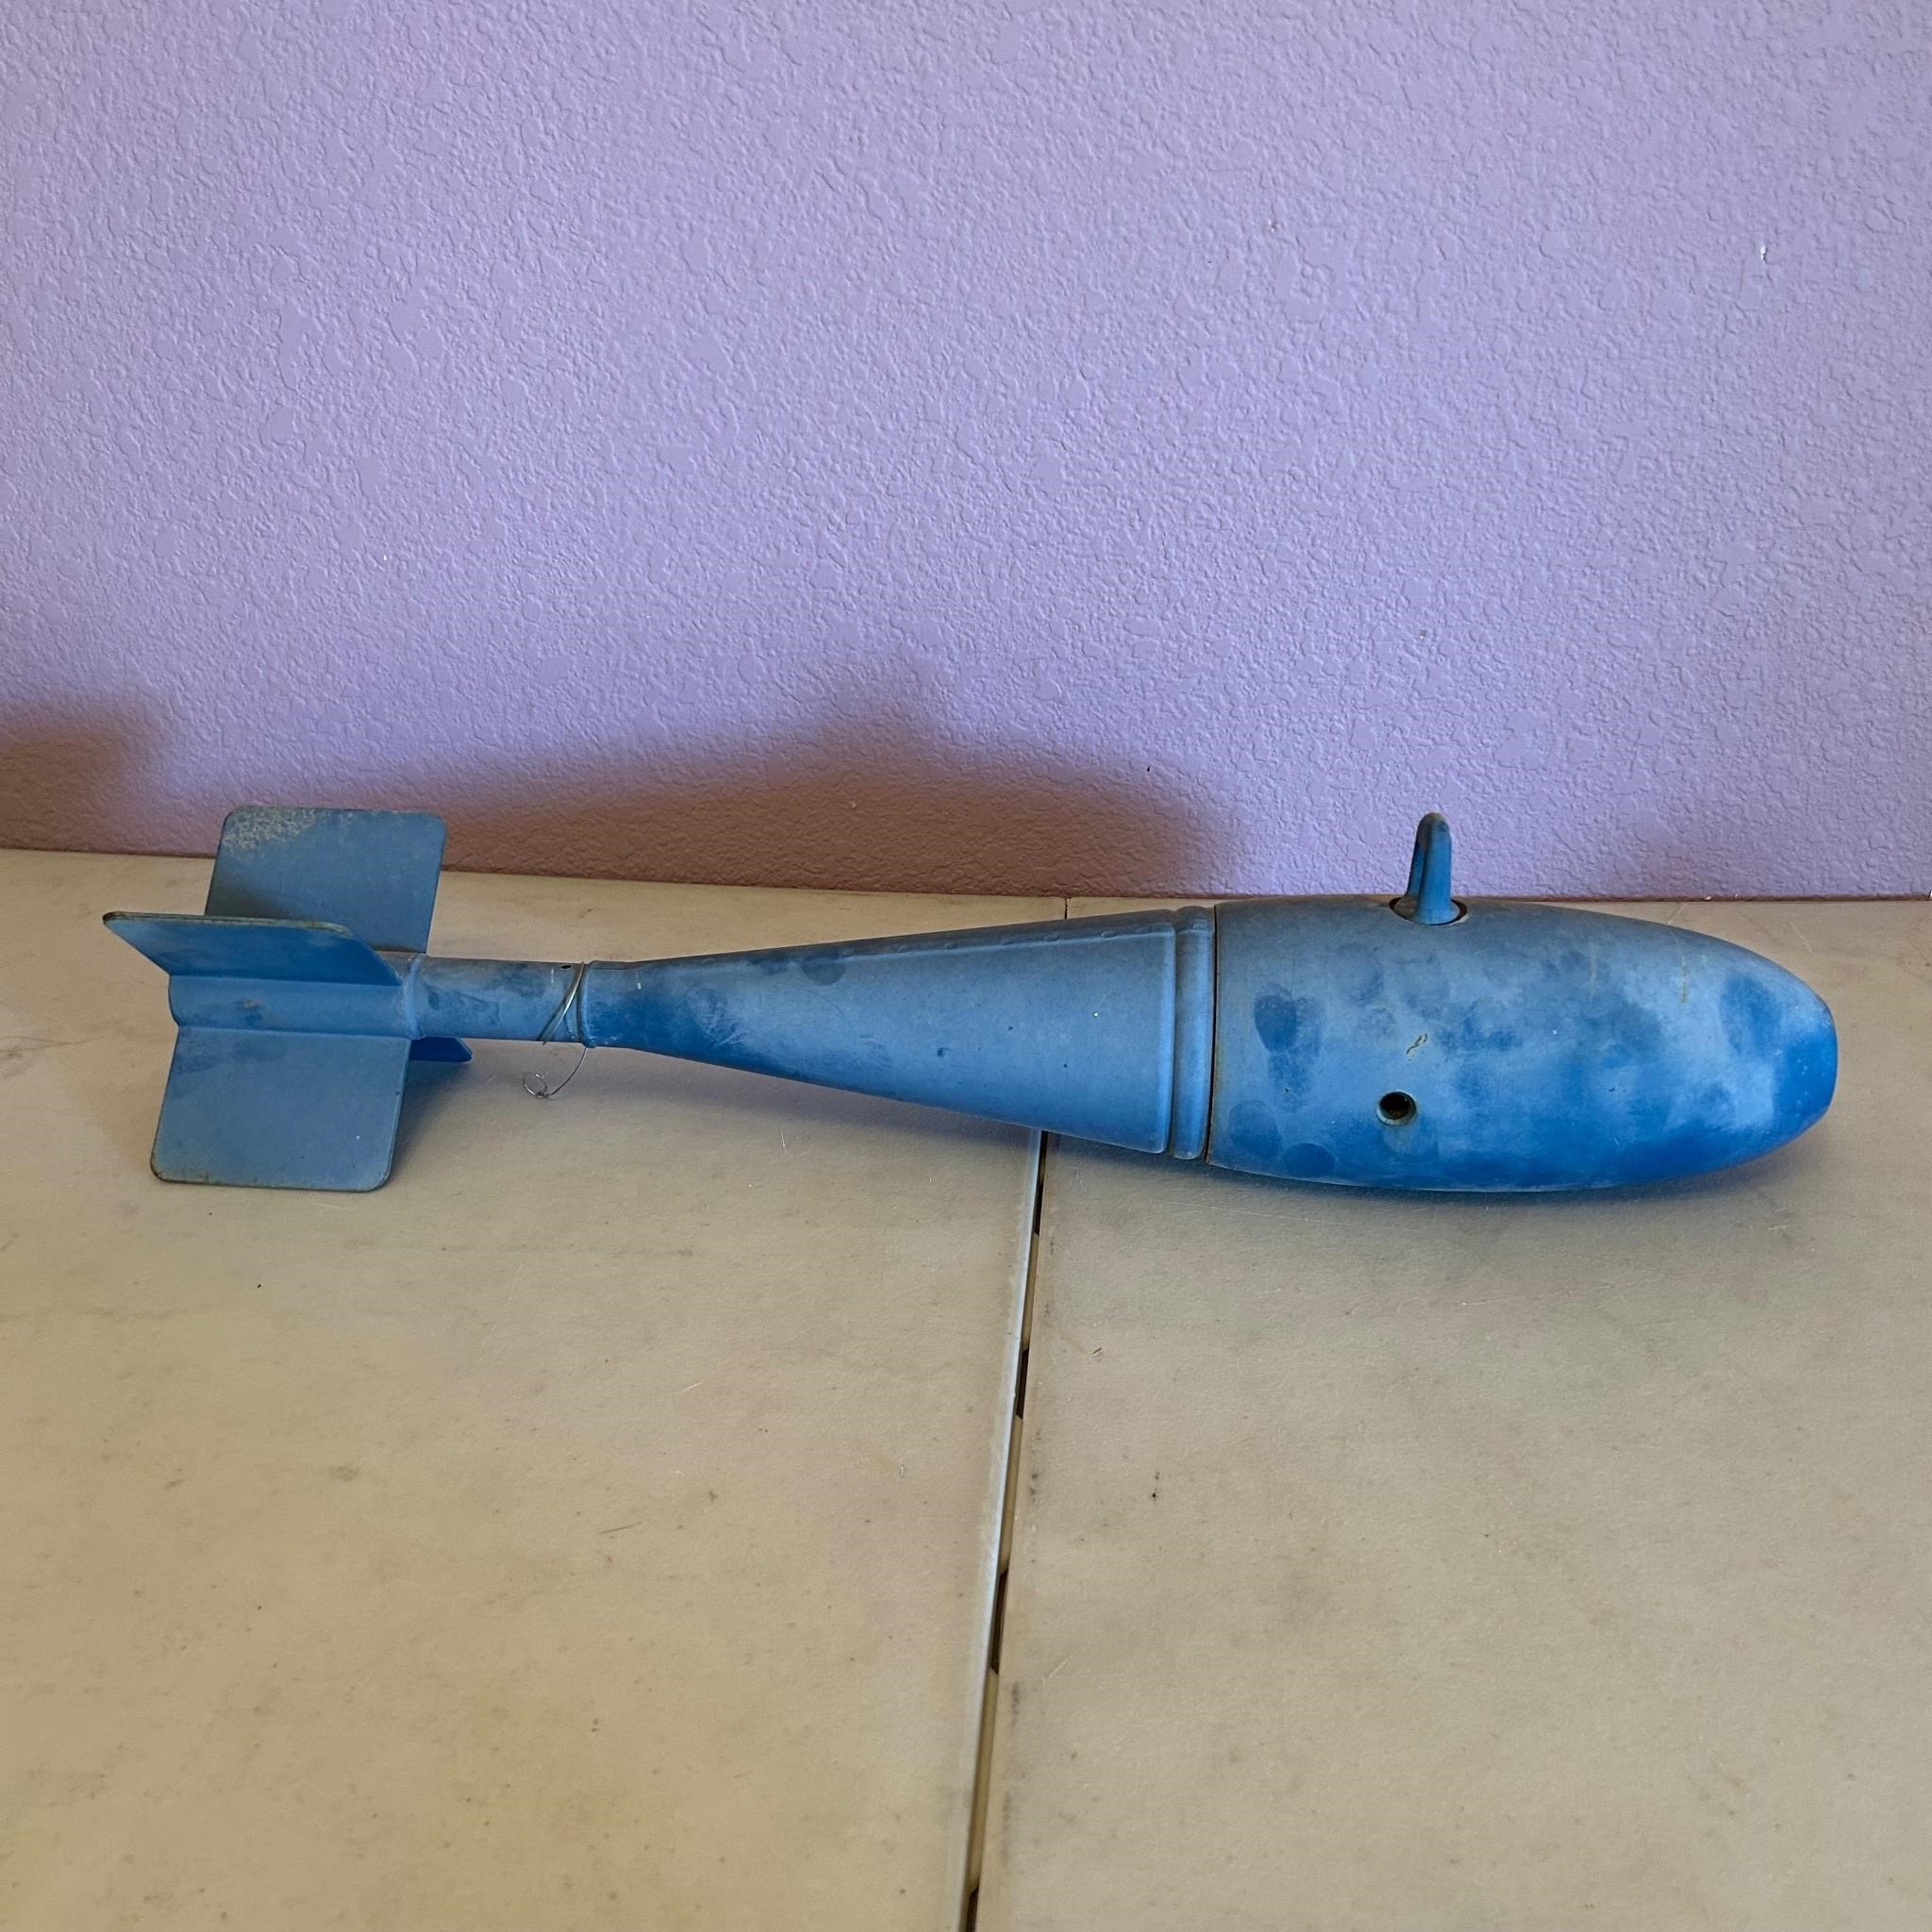 Vintage United States Air-Force Practice Bomb